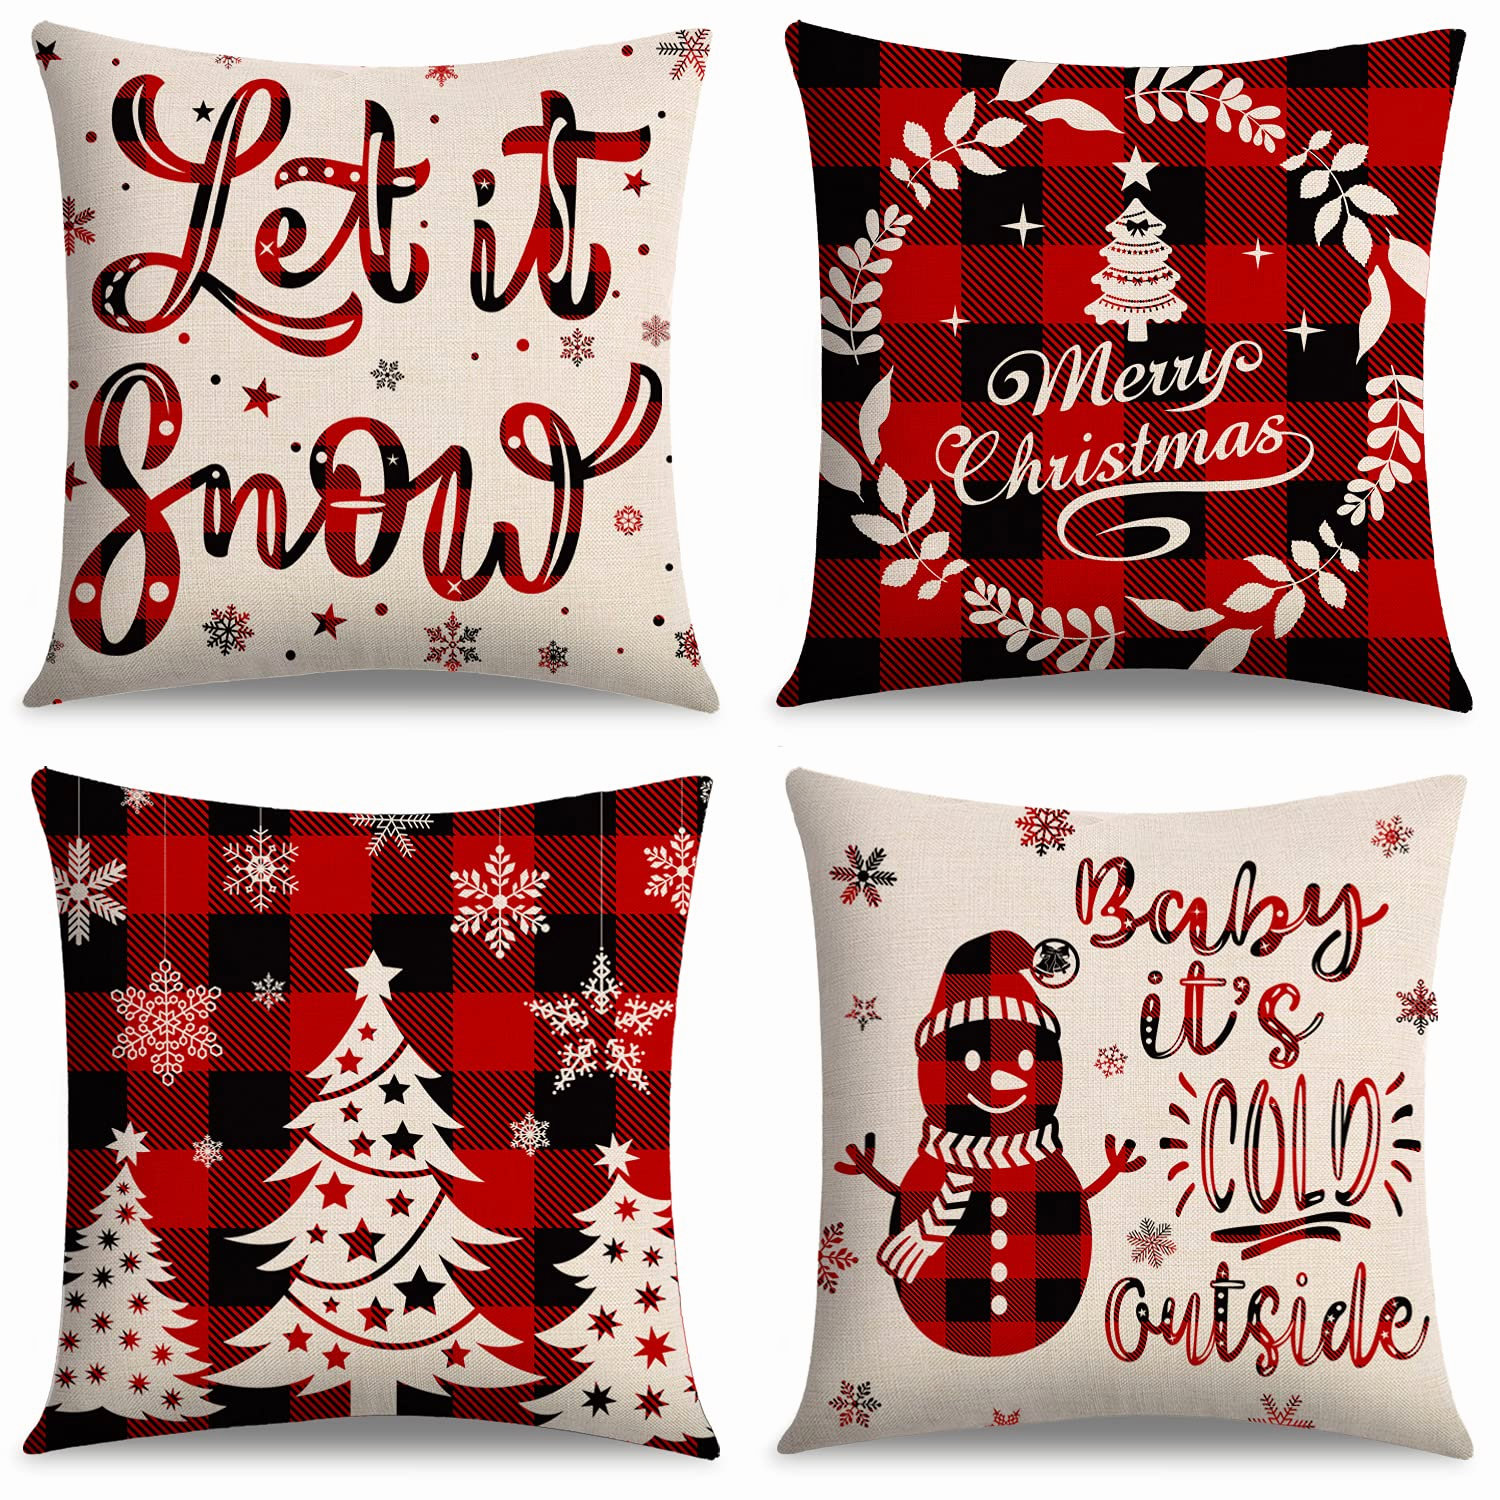 Quality Cotton Christmas Pillowcases for Kids Childs Holiday Bedtime Pillow Case Boys and Girls Pillowcases Ready to Ship